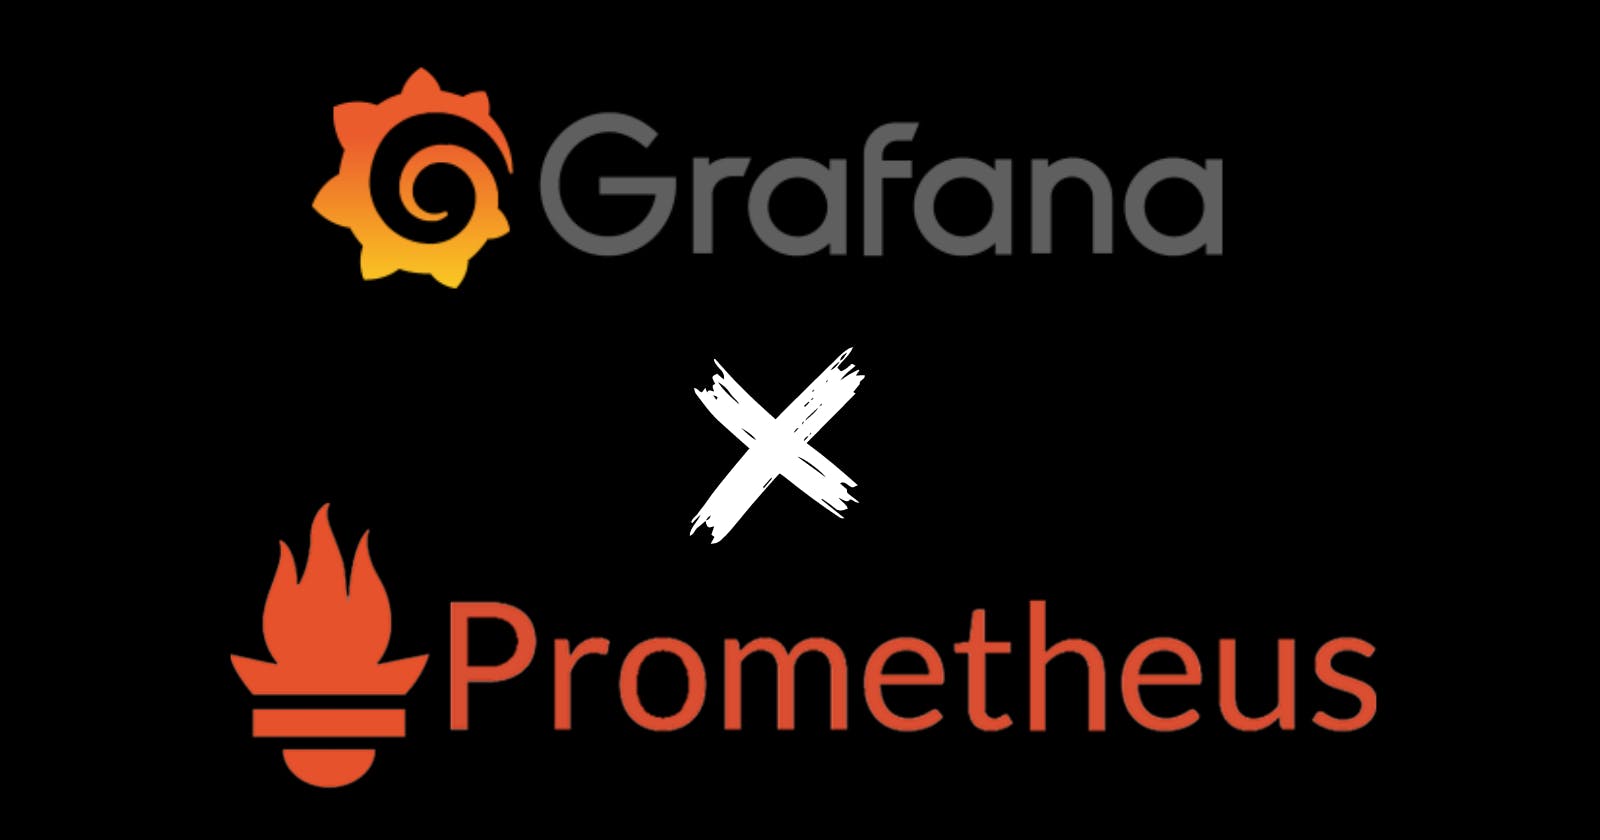 What are Grafana data sources and how to configure prometheus as datasource in Grafana